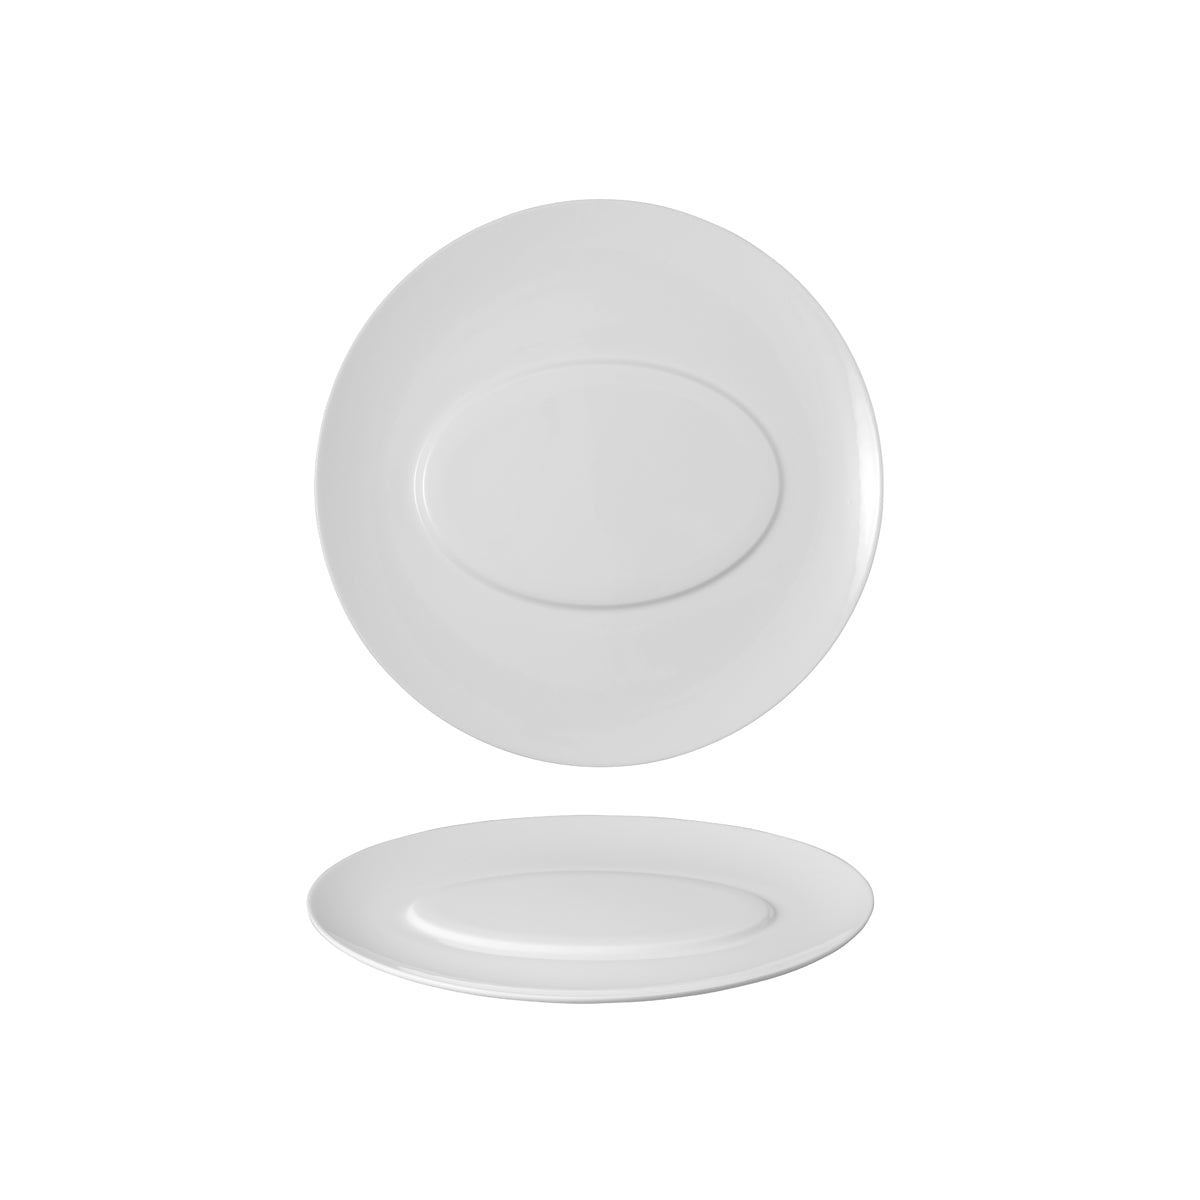 VB16-4090-2645 Villeroy And Boch Villeroy And Boch Stella Cosmo White Oval Plate Wide Rim 290x290x20mm Tomkin Australia Hospitality Supplies